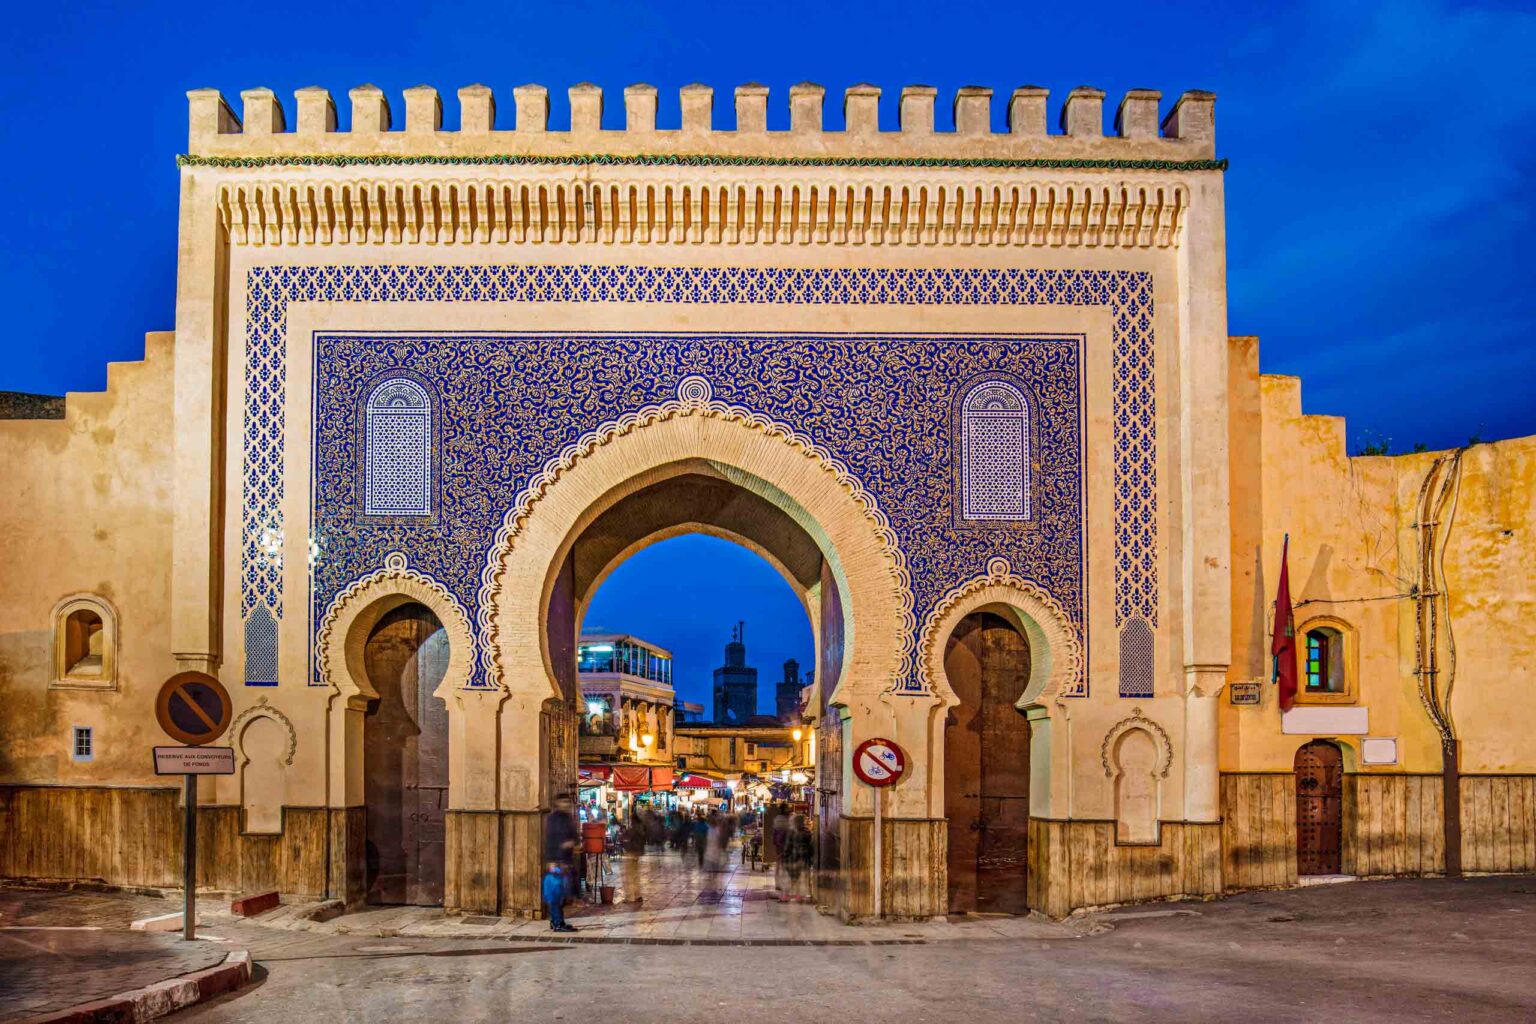 Grand crenellated entrance gate to a Moroccan city is covered in blue geometric tiles in front of bright blue sky.